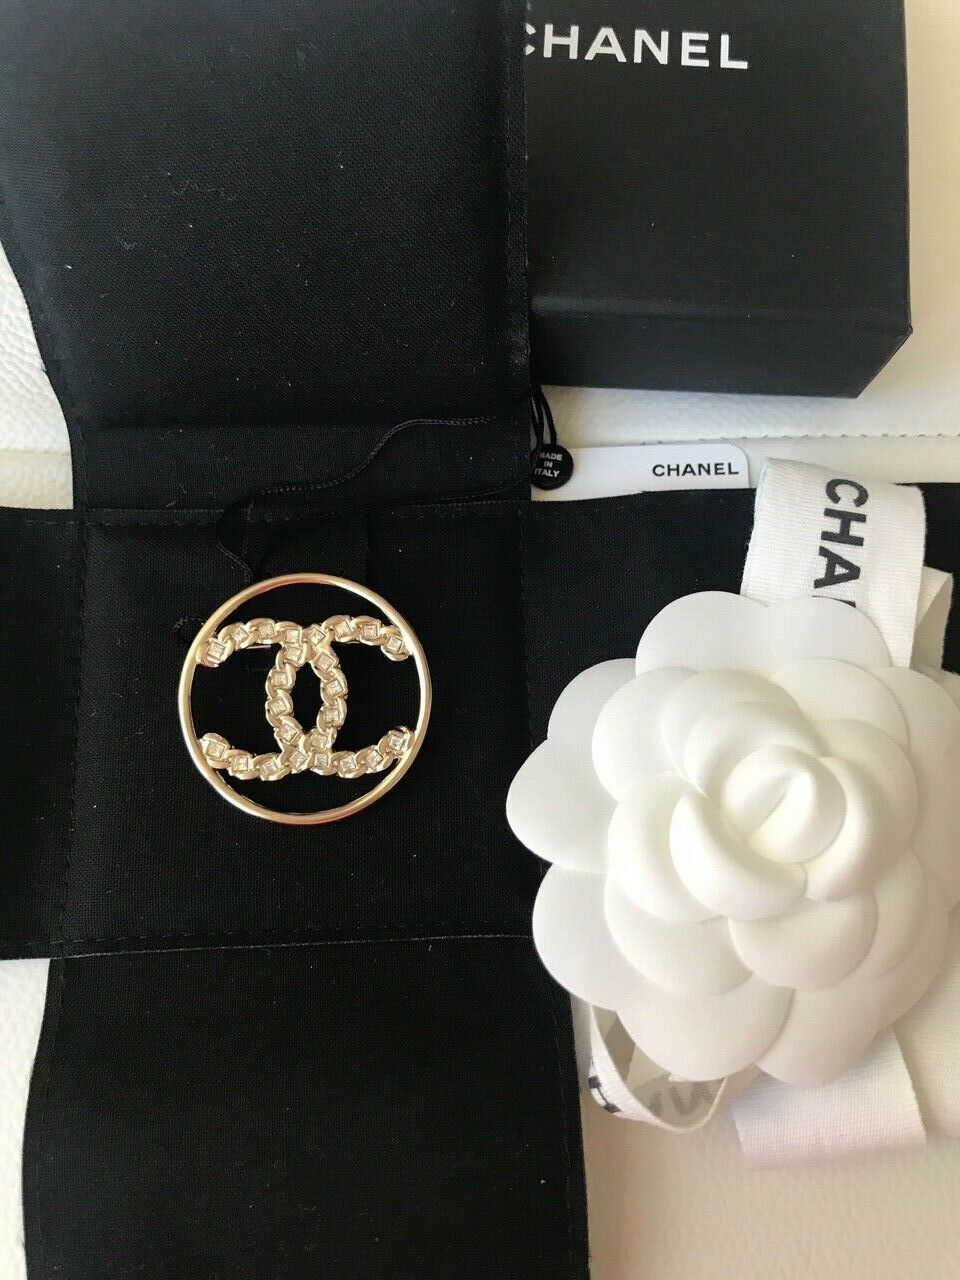 CHANEL 2019 GOLDEN TONE CC LOGO WHITE CRYSTALS ROUND BROOCH PIN CHARM